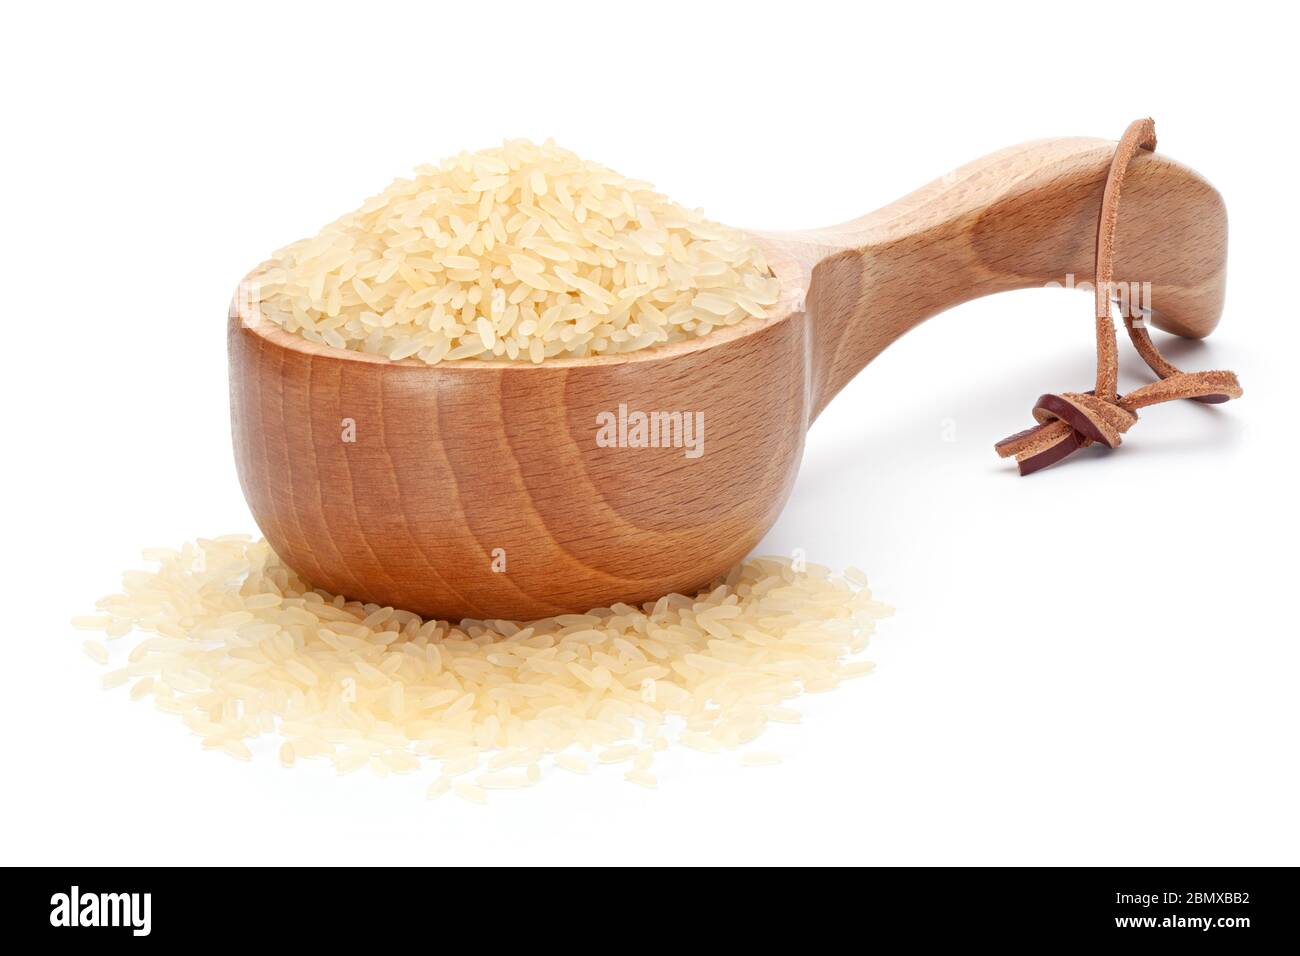 Rice in woodenware, isolated on the white background. Stock Photo